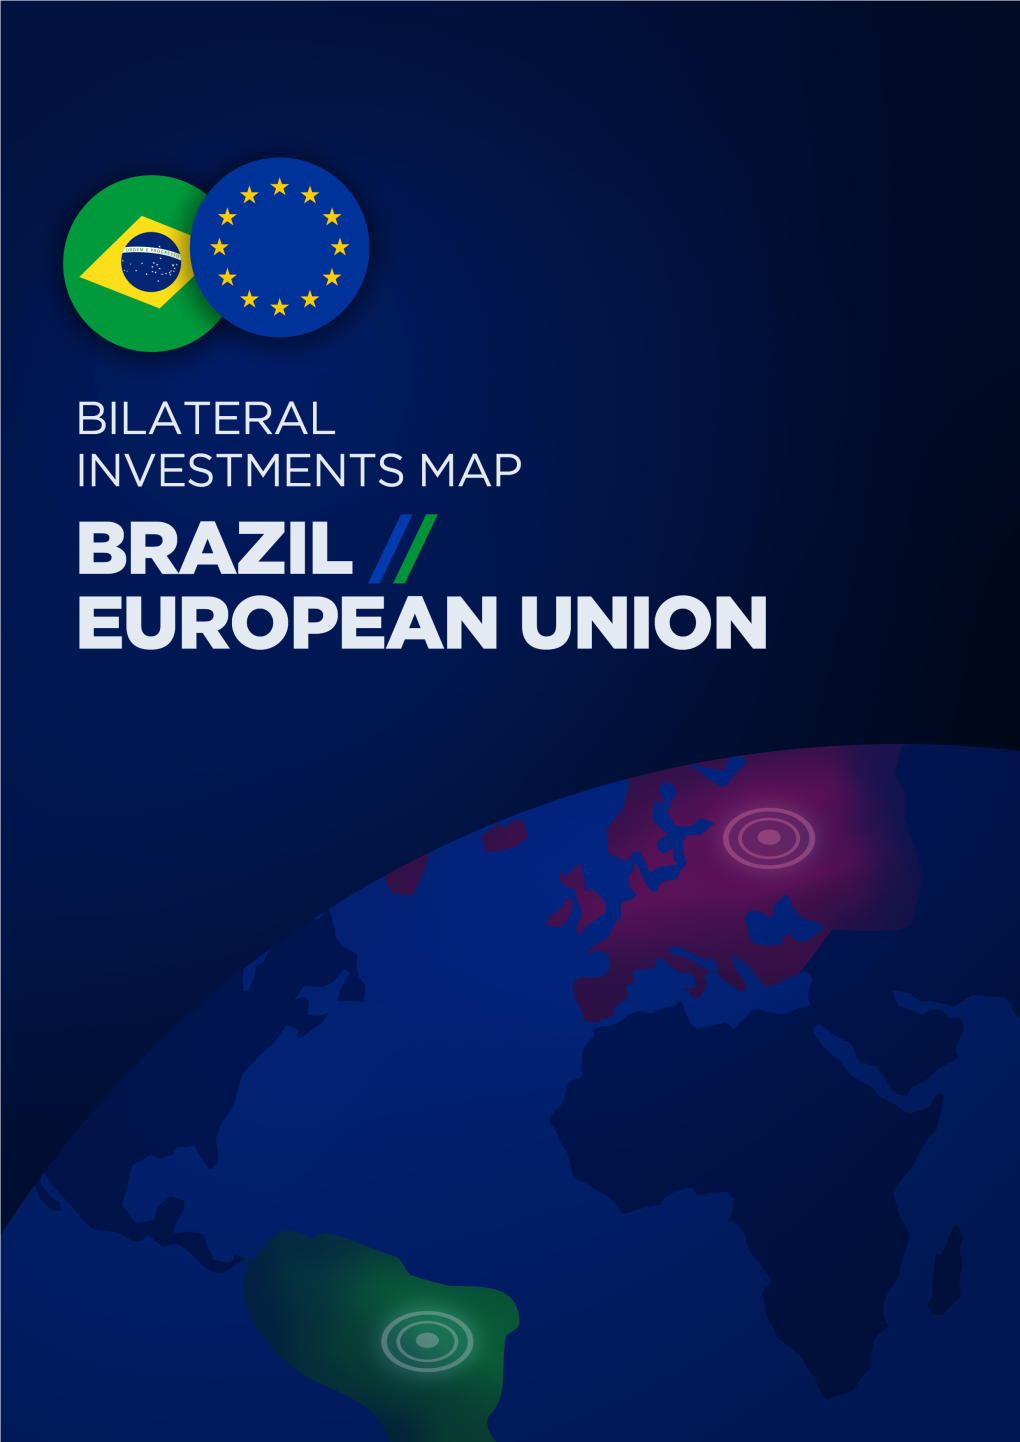 2. Brazilian Foreign Direct Investment in the European Union